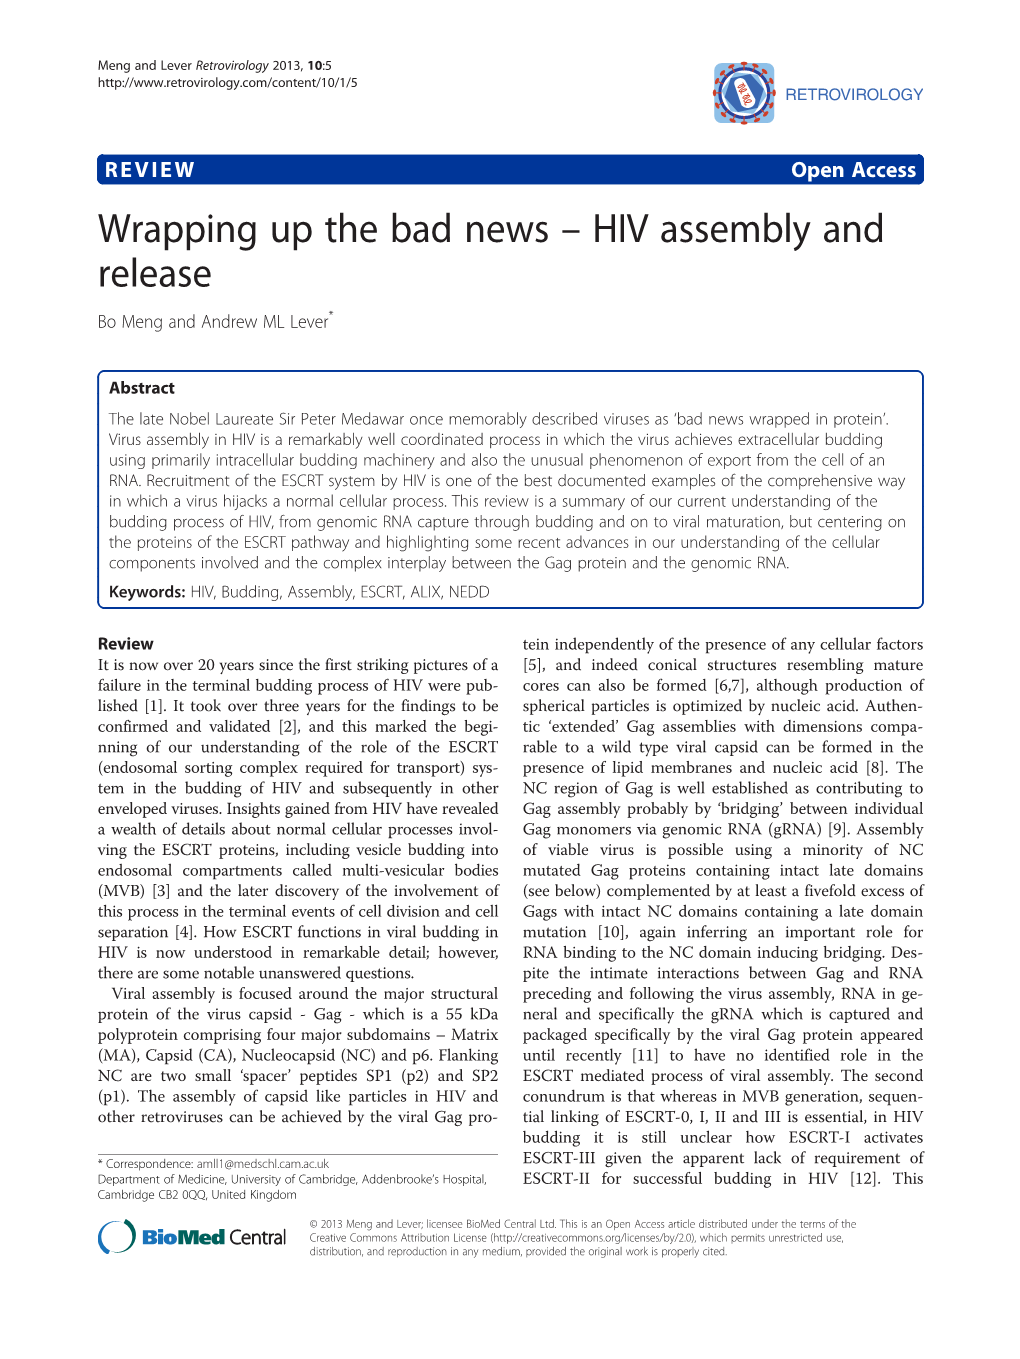 Wrapping up the Bad News – HIV Assembly and Release Bo Meng and Andrew ML Lever*